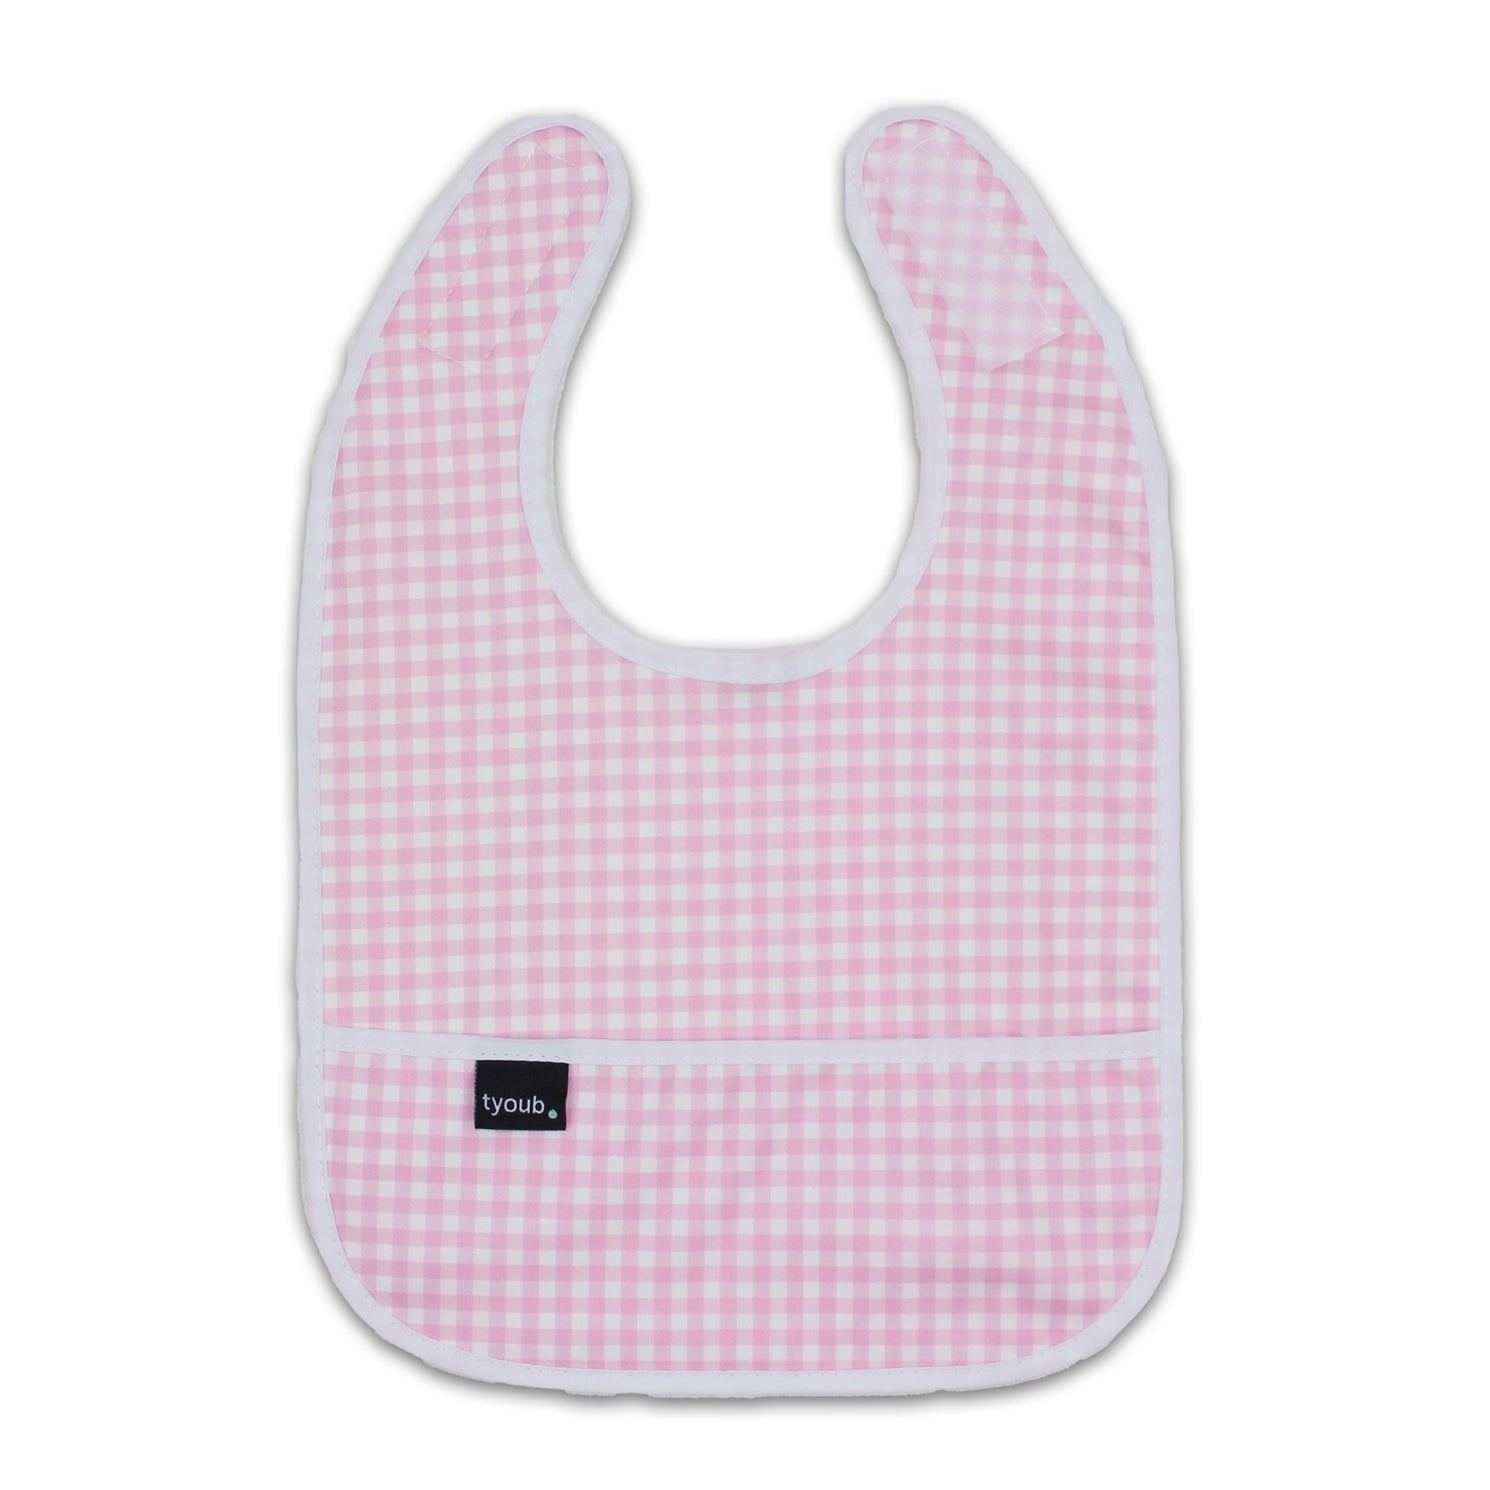 Baby Bib Tyoub Stay-dry Waterproof Fabric– Candy Pink White Gingham Check. For baby feeding and eating, bib covers chest area, keeping baby clean after mealtime. Comfortable with a strong Velcro tab to ensure a comfortable and secure fit, but easy for carer to remove. Gentle and soft on baby skin. Safe and secure our bibs are BPA-free, phthalate-free, PVC-free and lead-free. Unisex design fits infant, baby, toddler boys and girls from 6 months to 24 months.